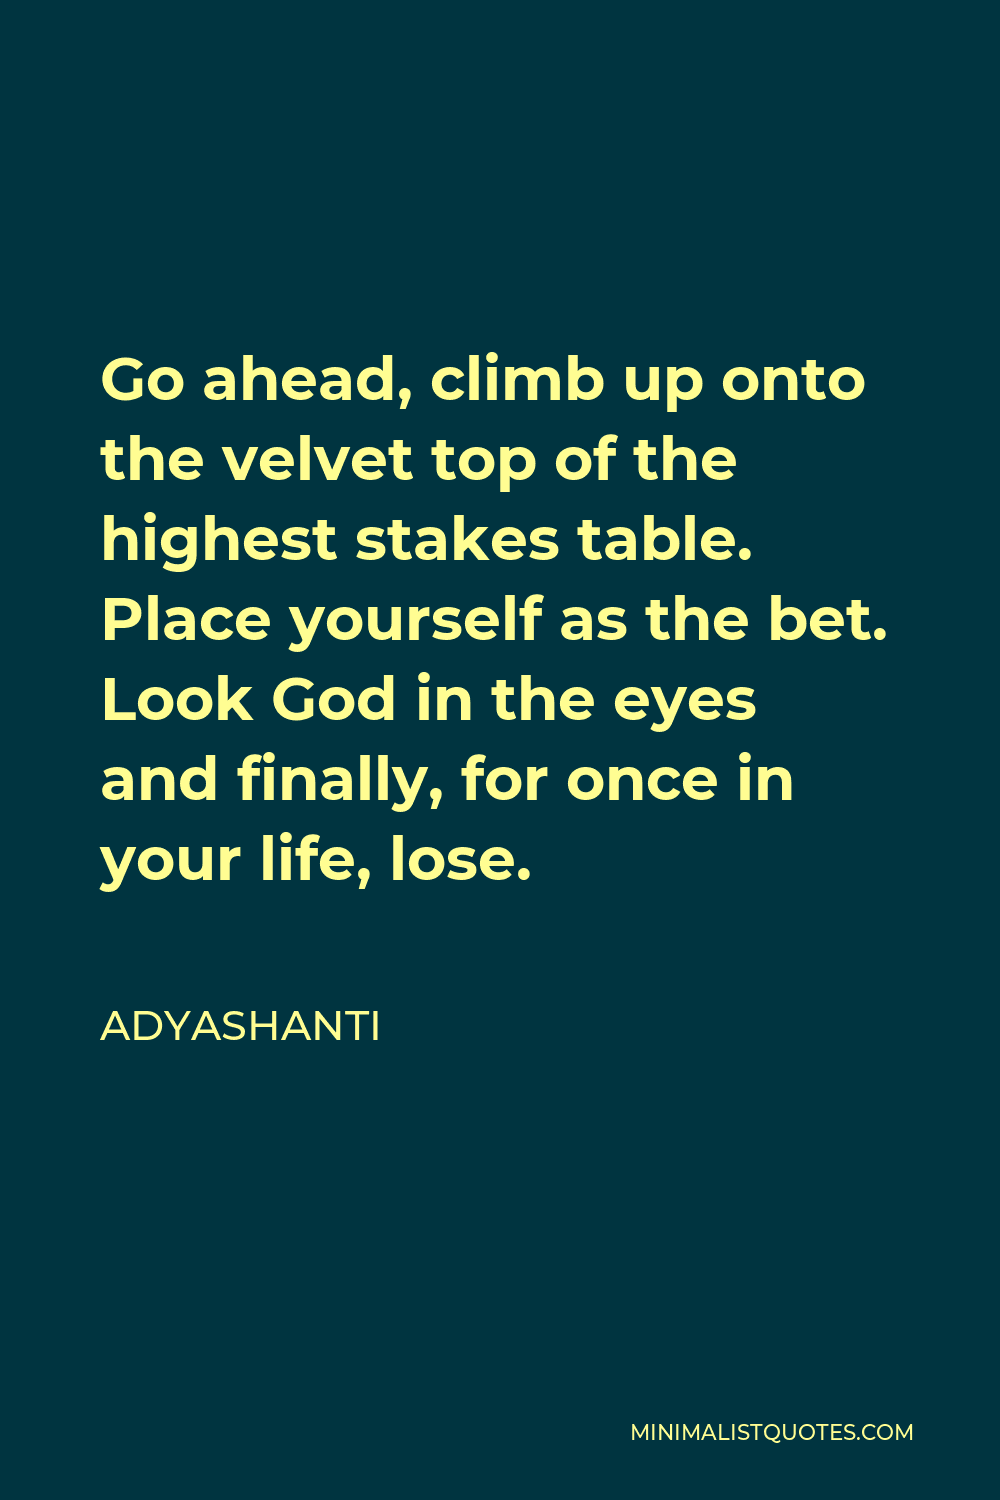 Adyashanti Quote - Go ahead, climb up onto the velvet top of the highest stakes table. Place yourself as the bet. Look God in the eyes and finally, for once in your life, lose.